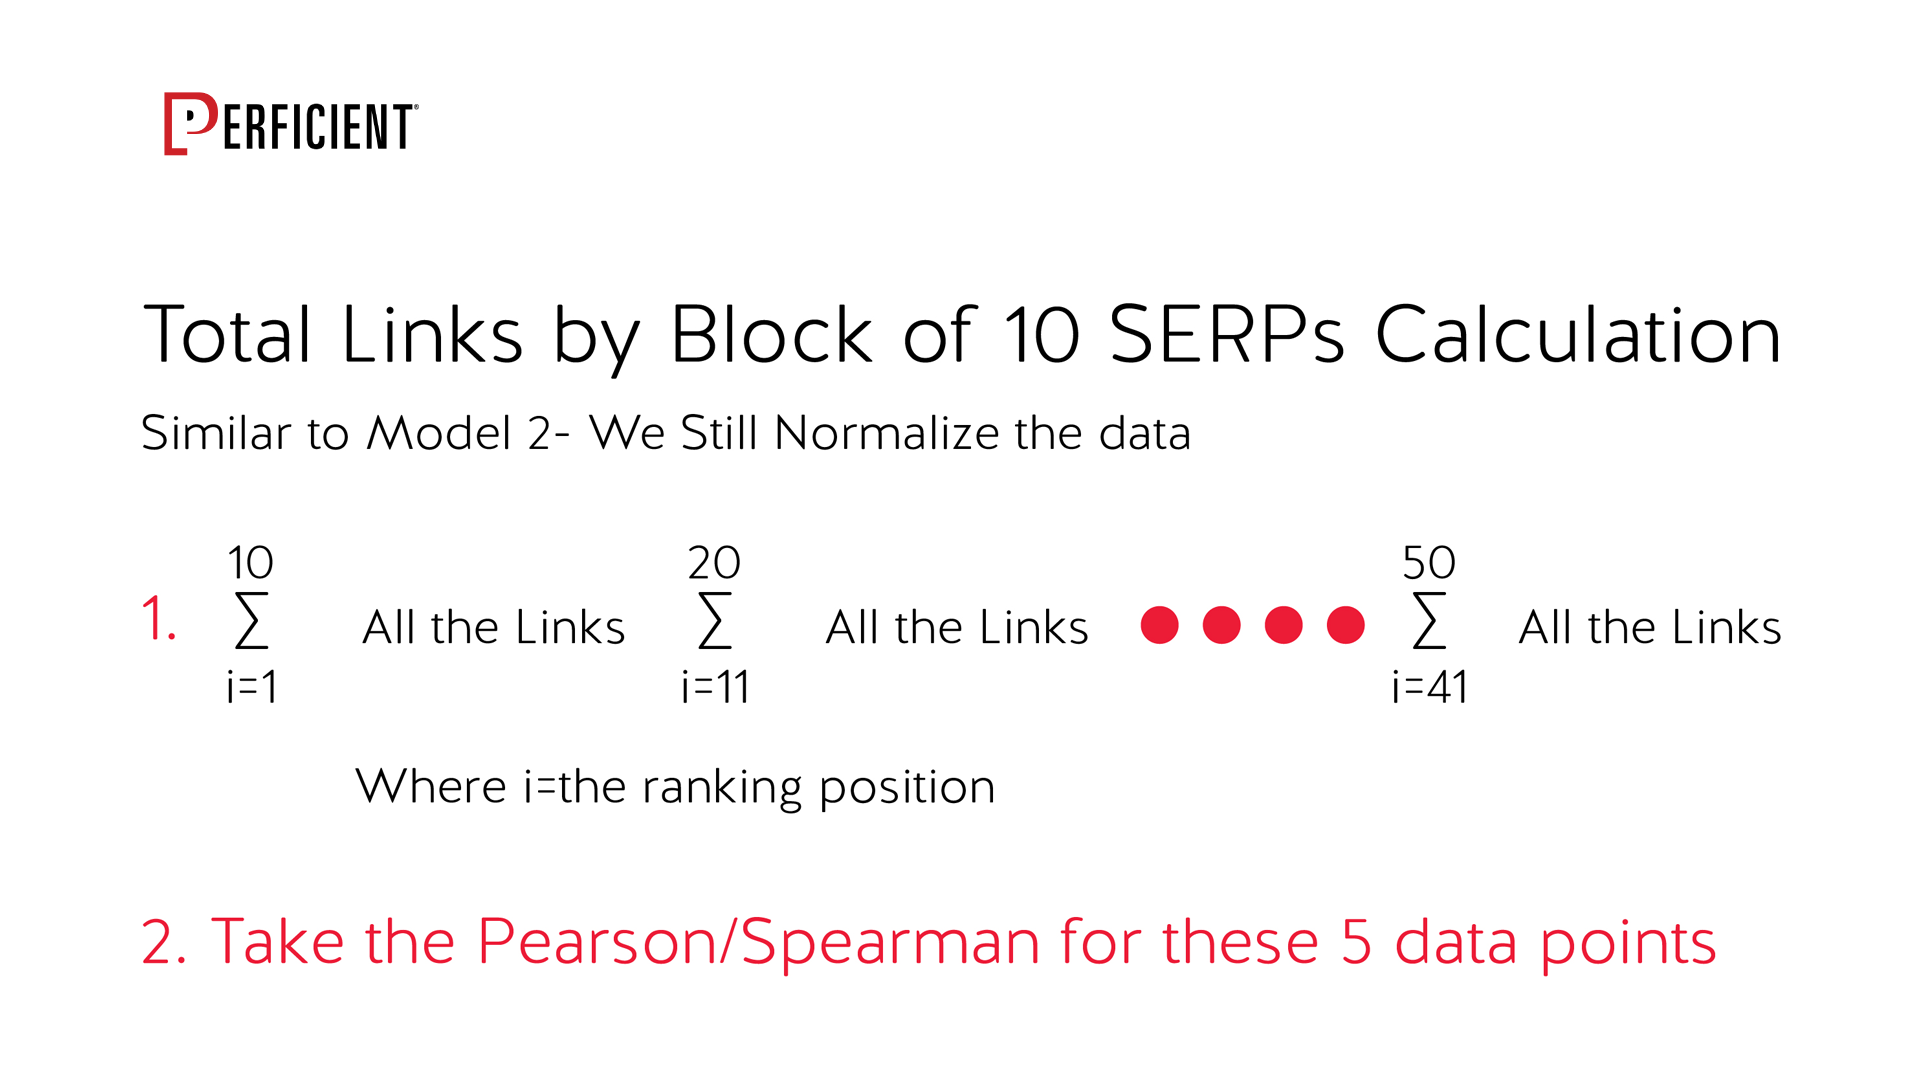 Total Links by block of 10 SERPs